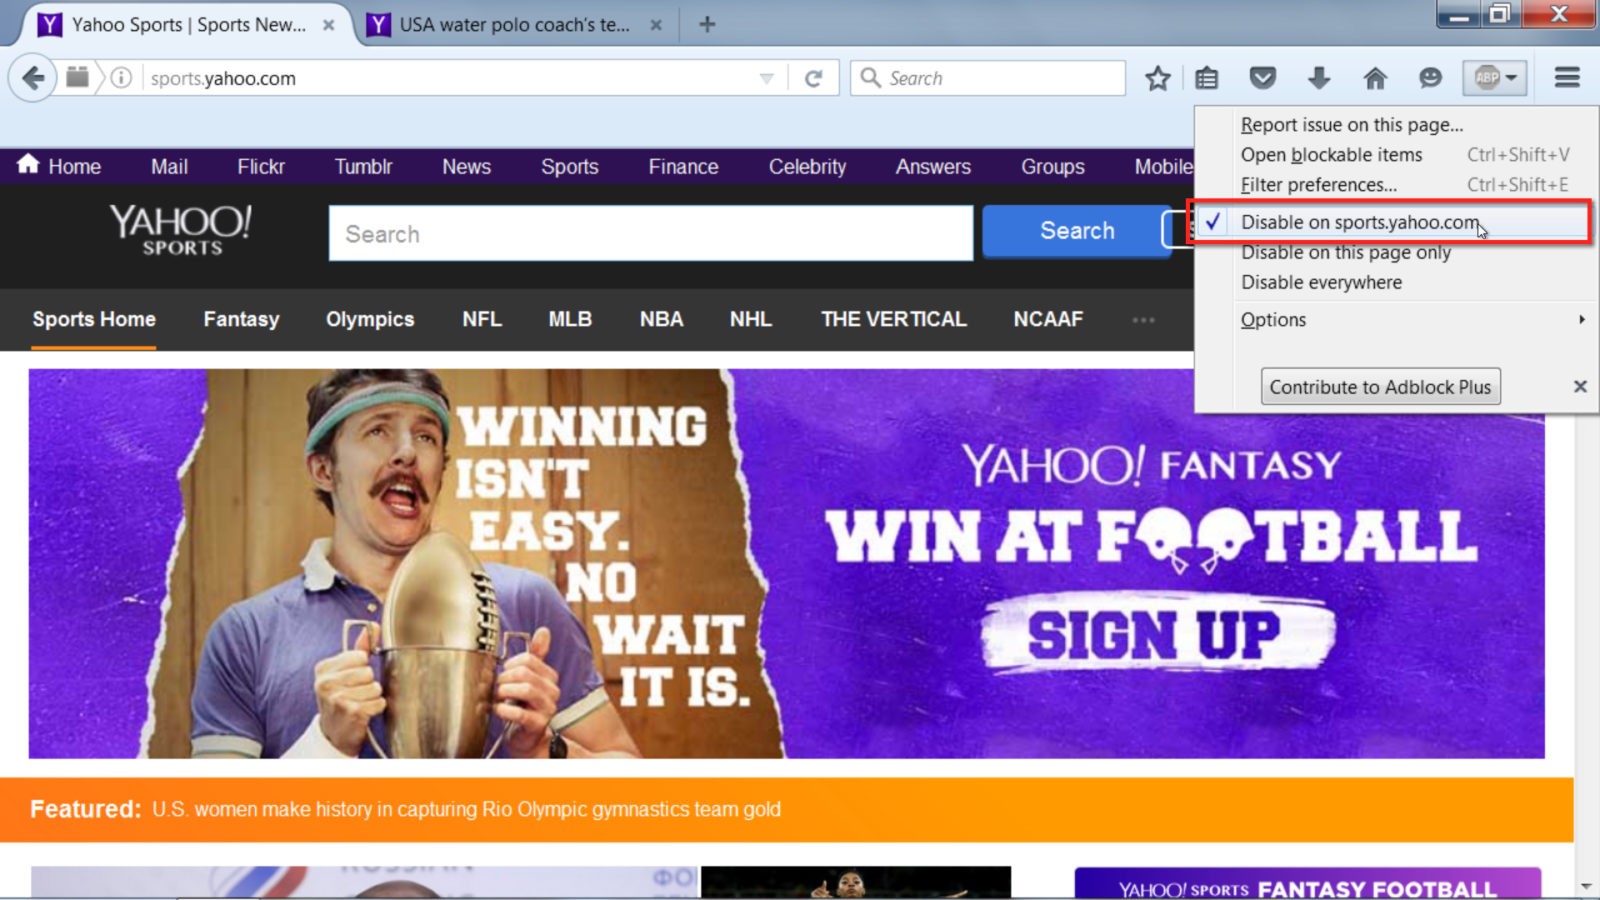 The Yahoo.com Sports page with ads